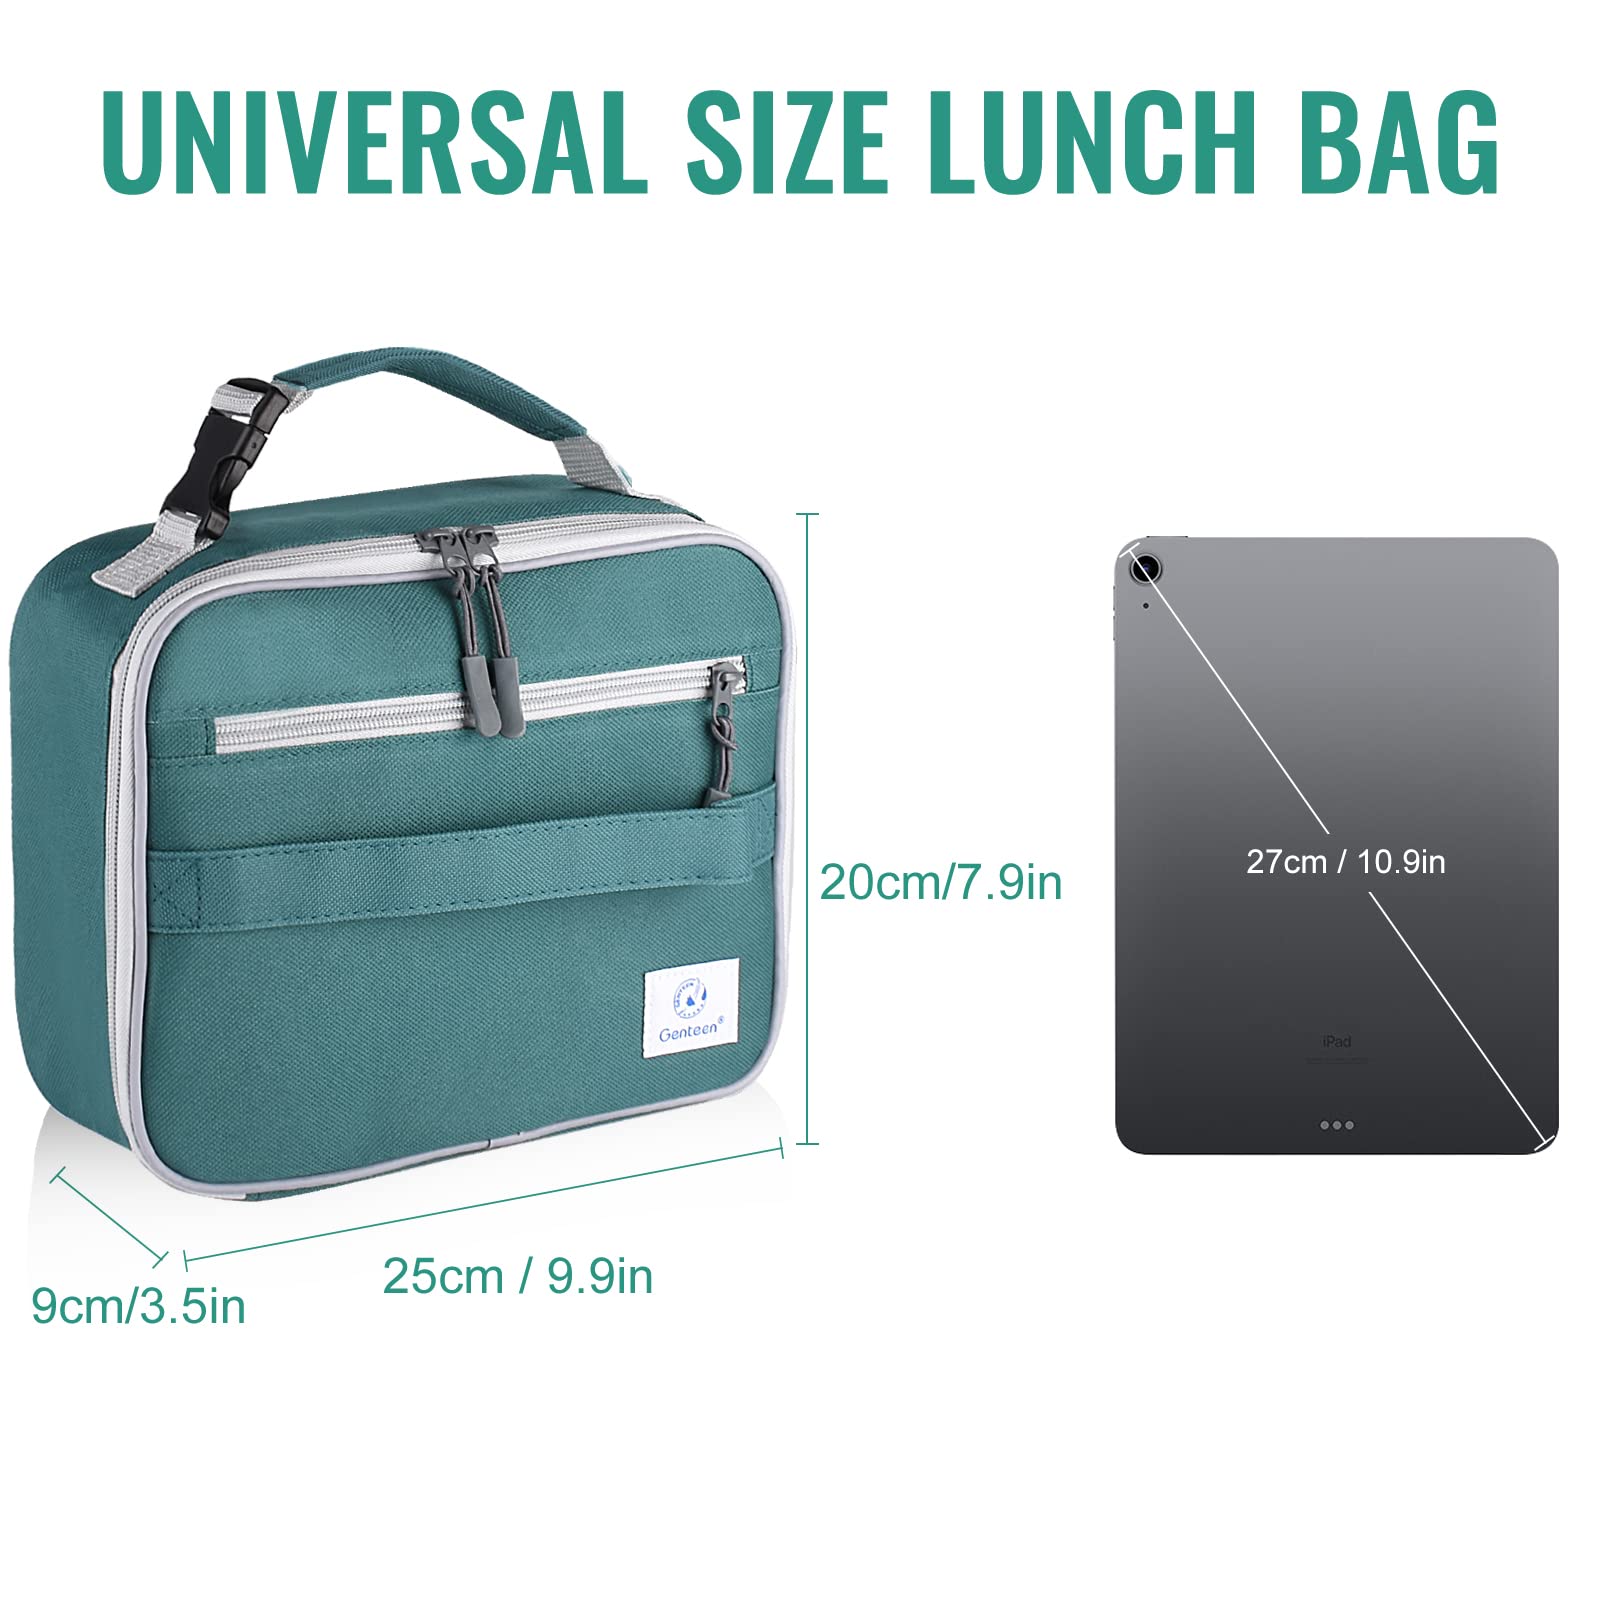 2 Insulated Lunch Bags (Black & Green)